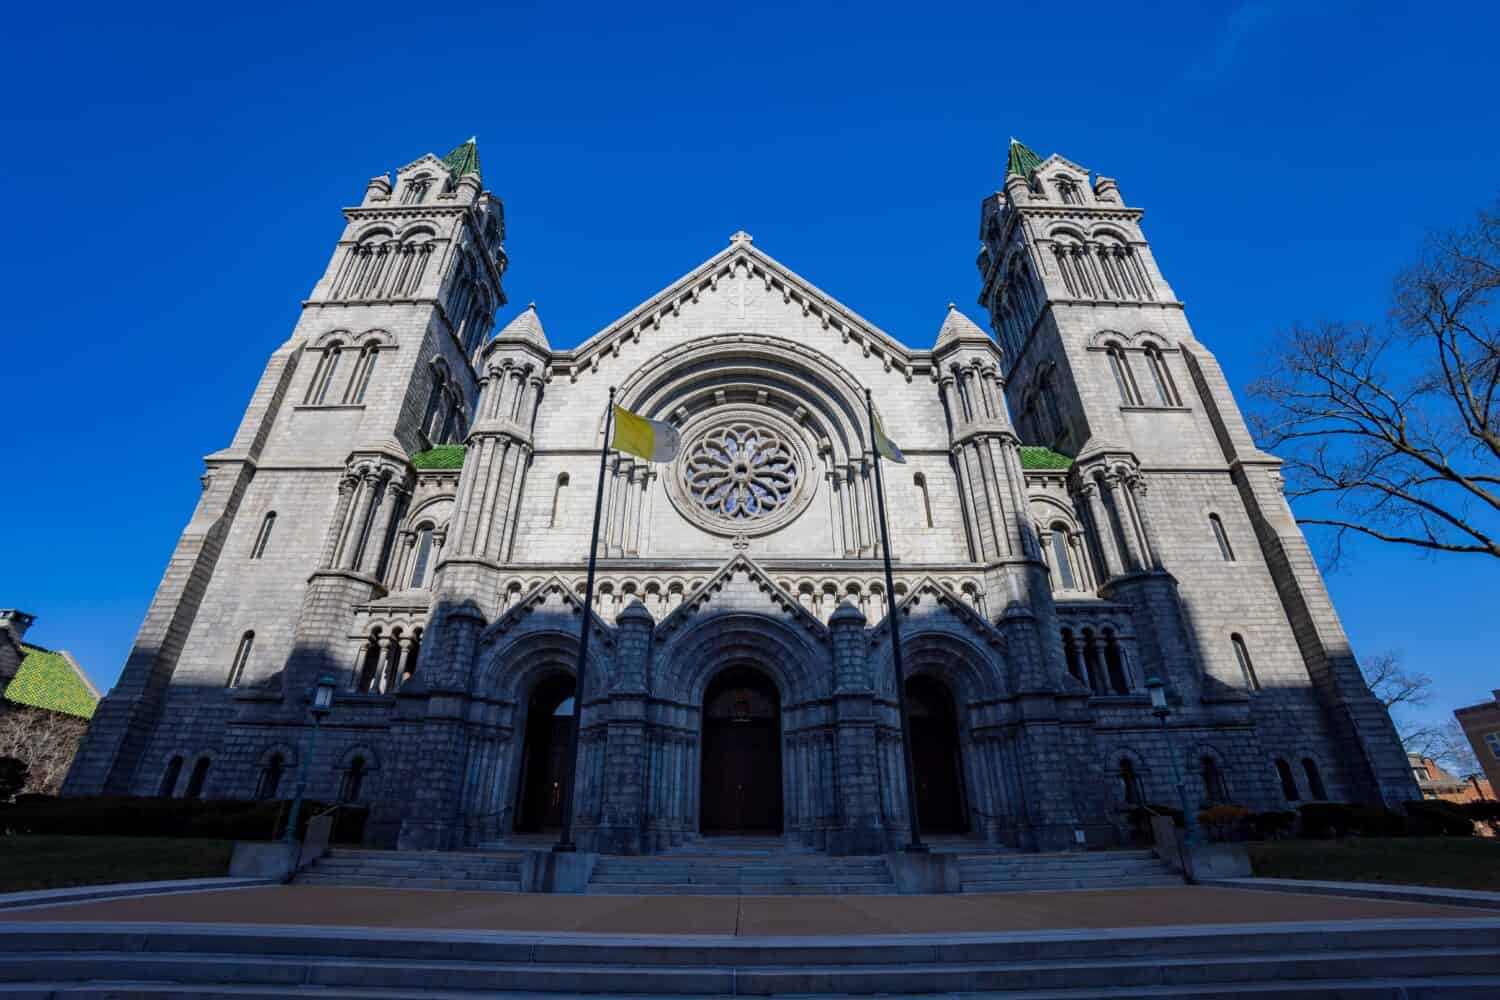 Sunny view of the Cathedral Basilica of Saint Louis at Missouri